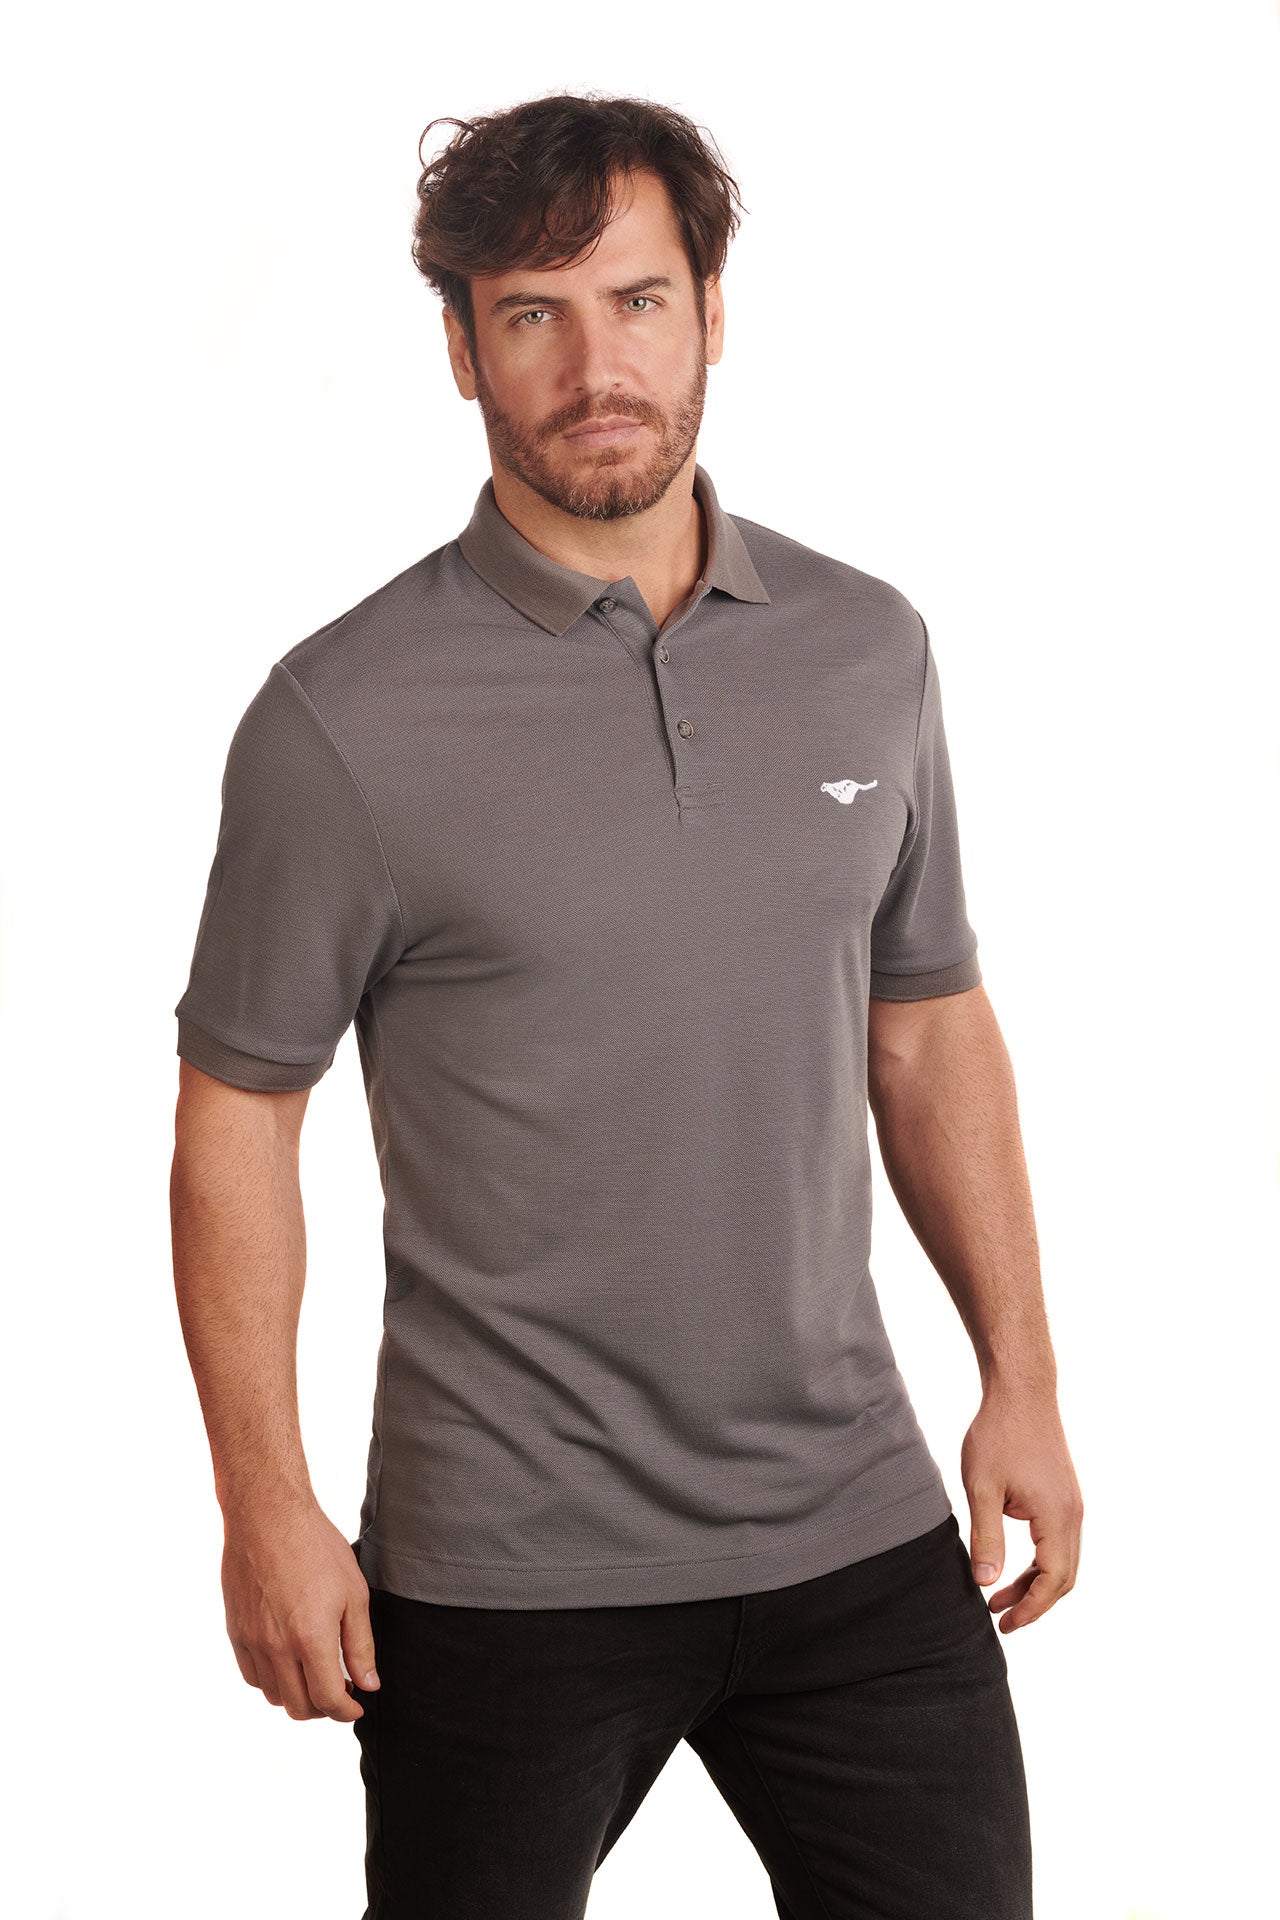 granite-grey-biodegradable-pure-merino-wool-golf-polo-shirt-for men-by-snöleo.-front-of-model-view.